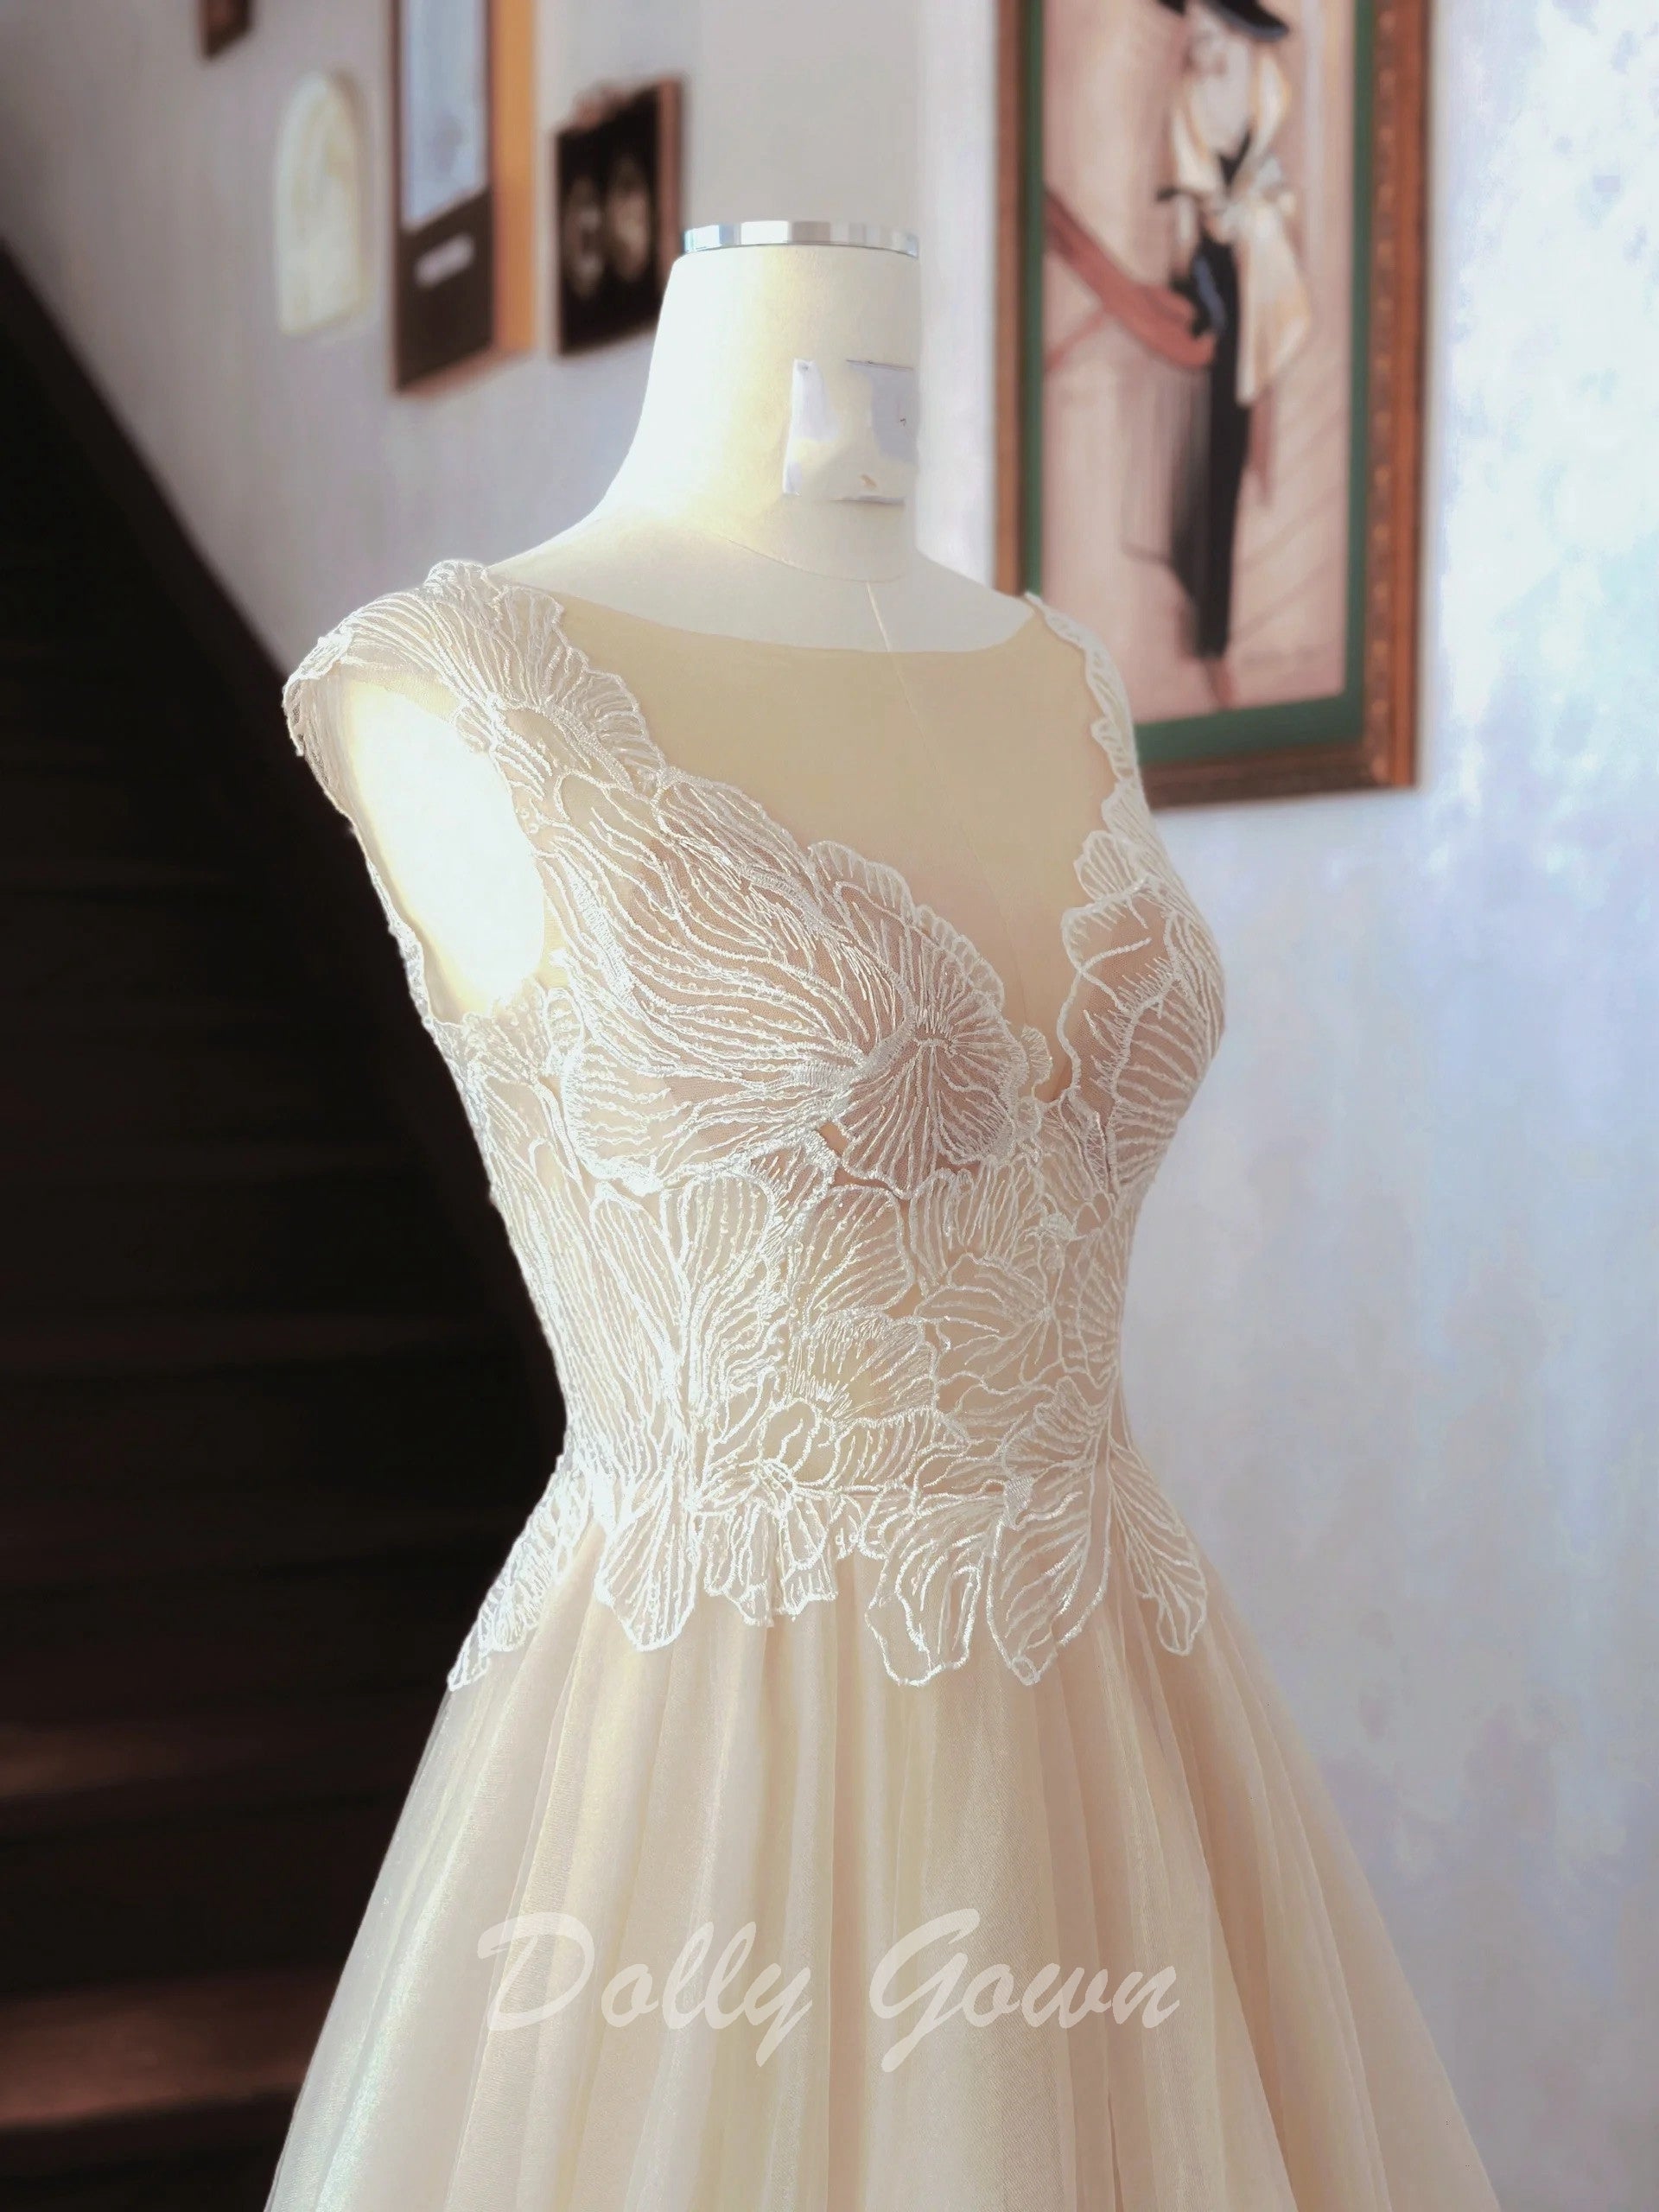 Fairy Illusion Lace Top A-line Sheer Flowy Champagne Wedding Dress - DollyGown